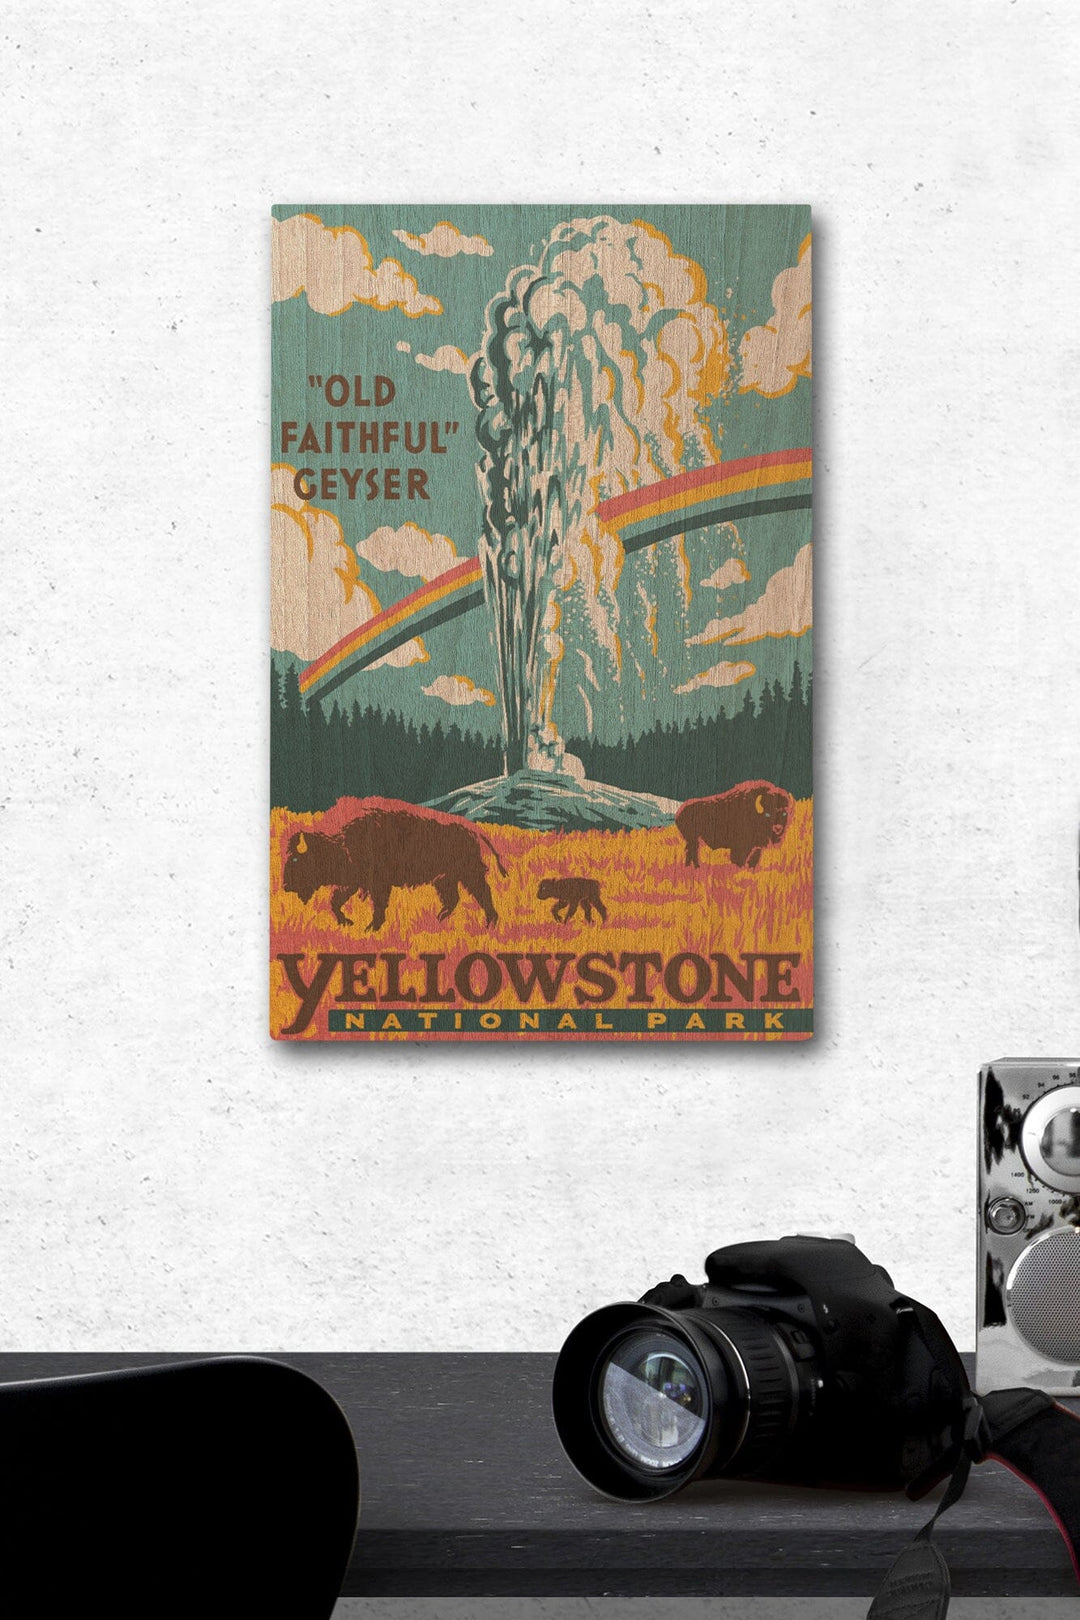 Yellowstone National Park, Wyoming, Explorer Series, Old Faithful Geyser, Wood Signs and Postcards Wood Lantern Press 12 x 18 Wood Gallery Print 